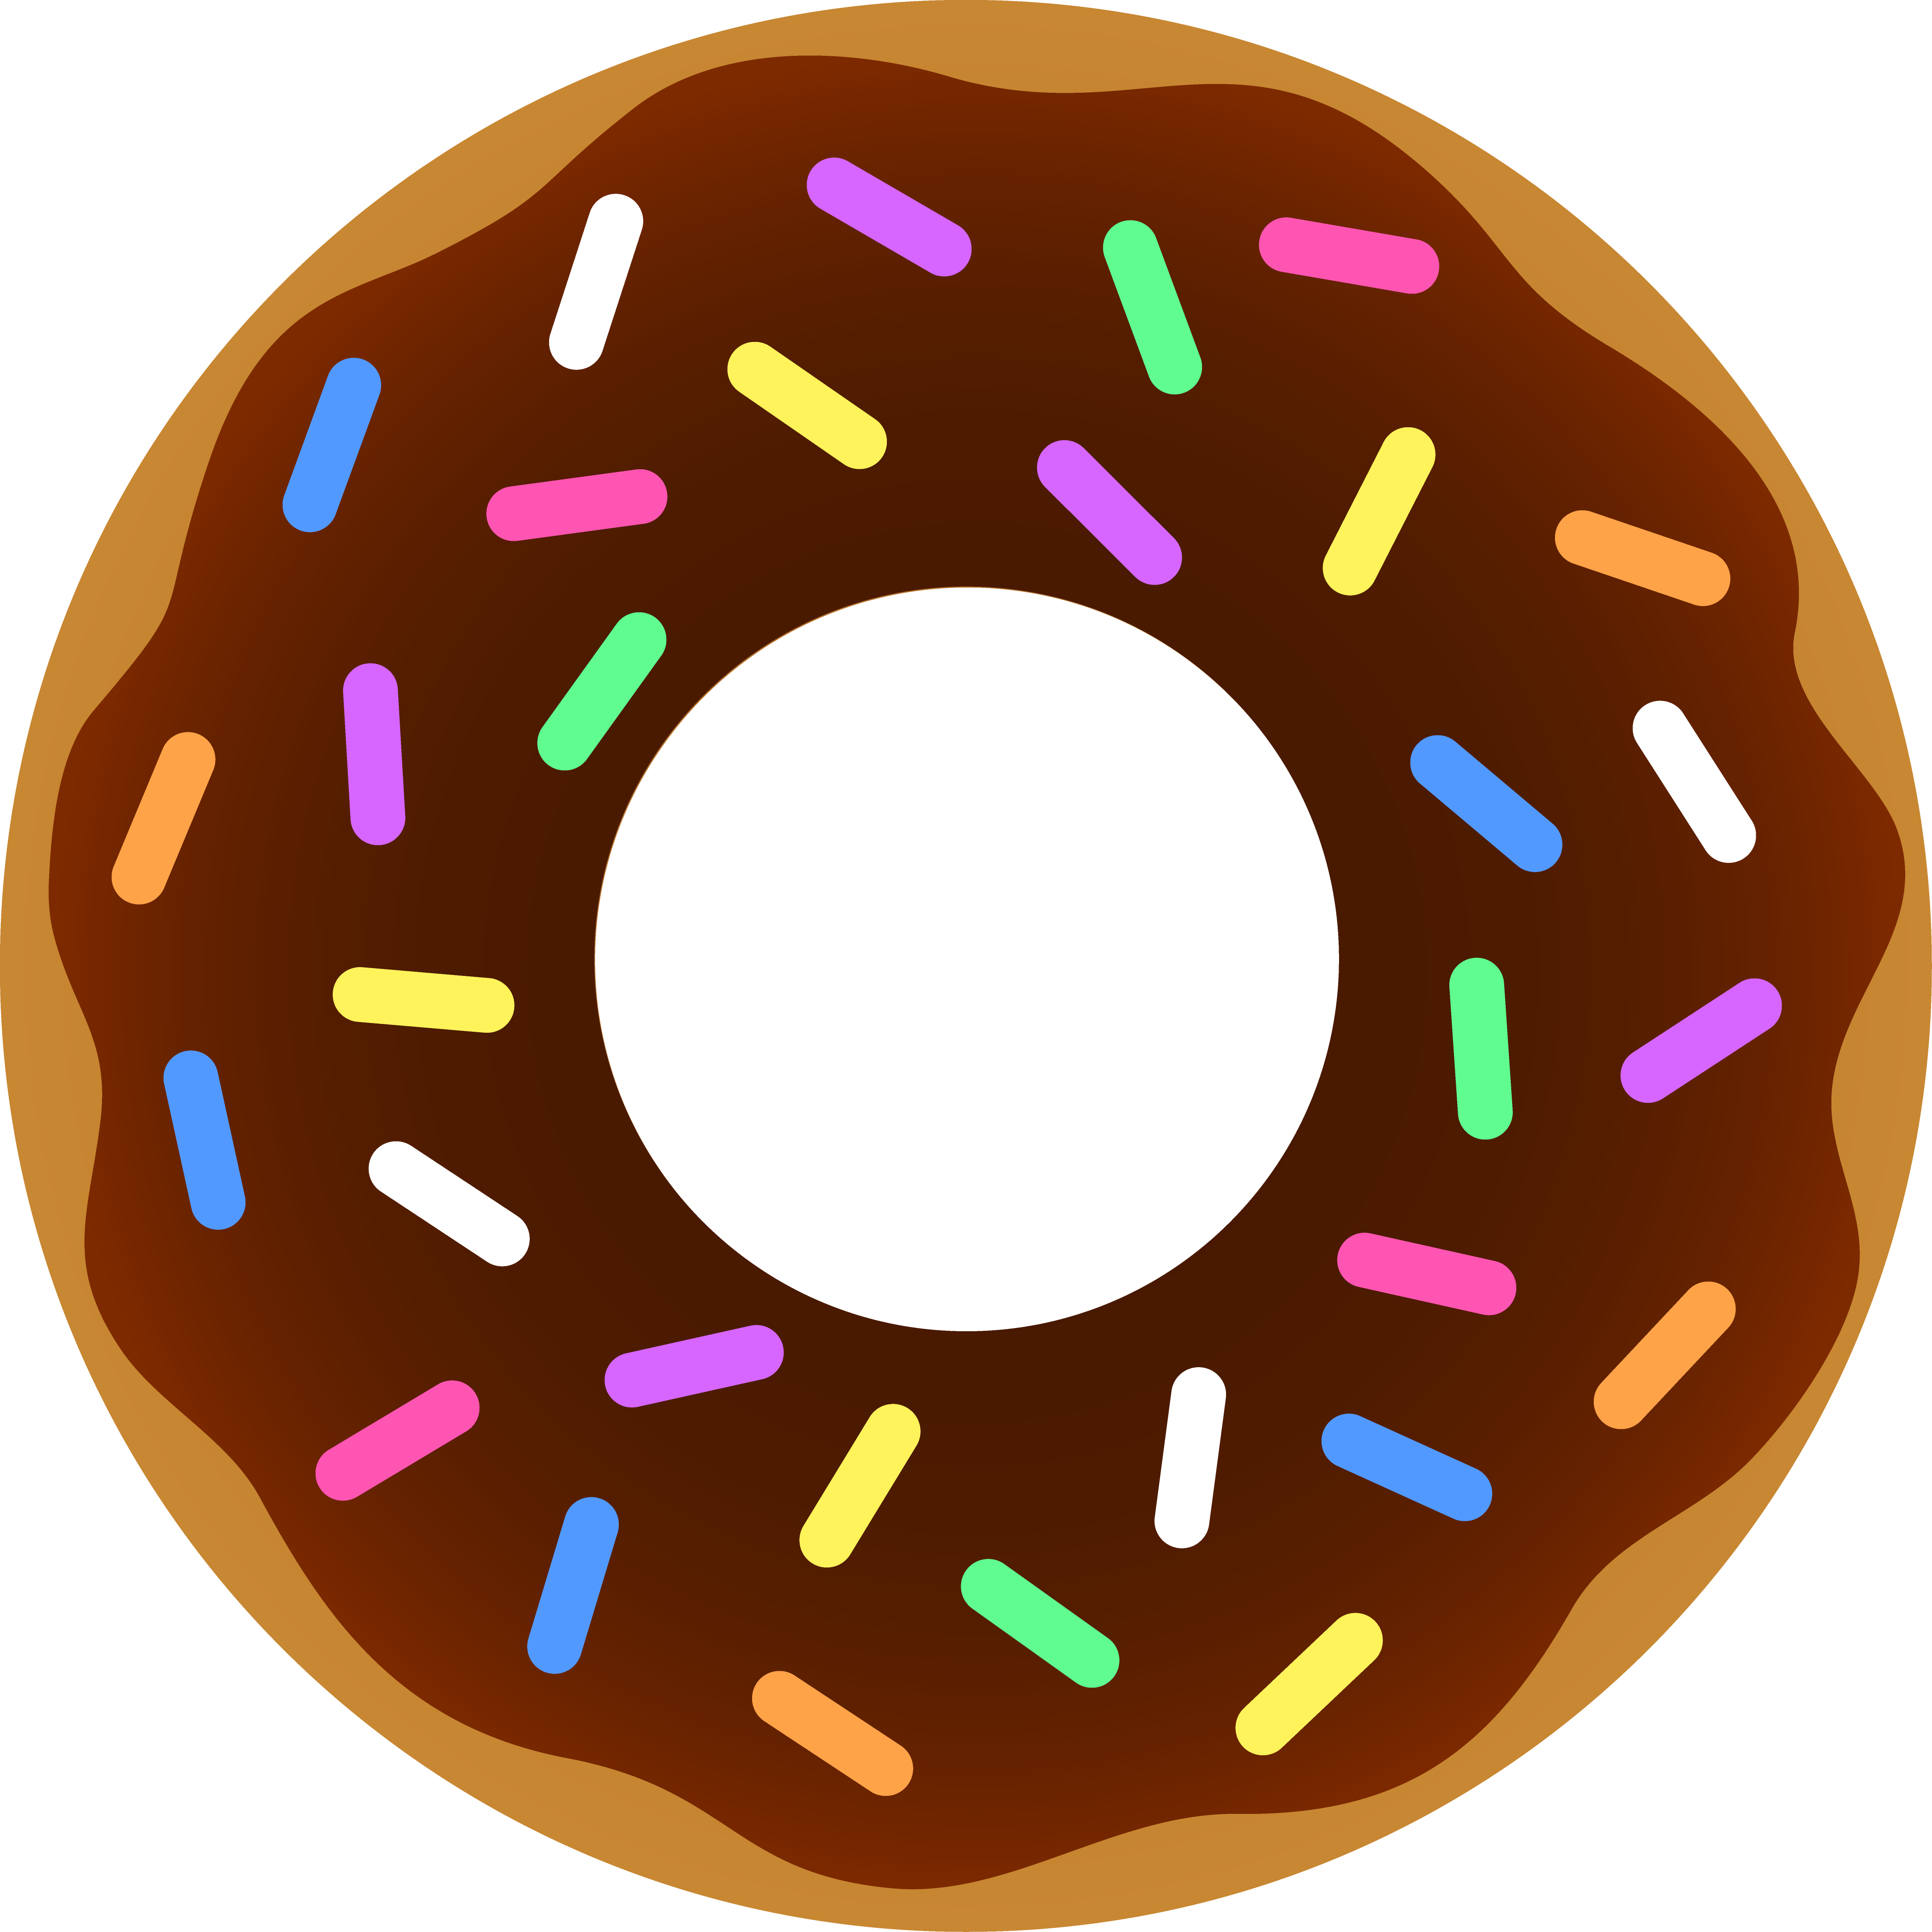  collection of with. Donuts clipart sugar donut